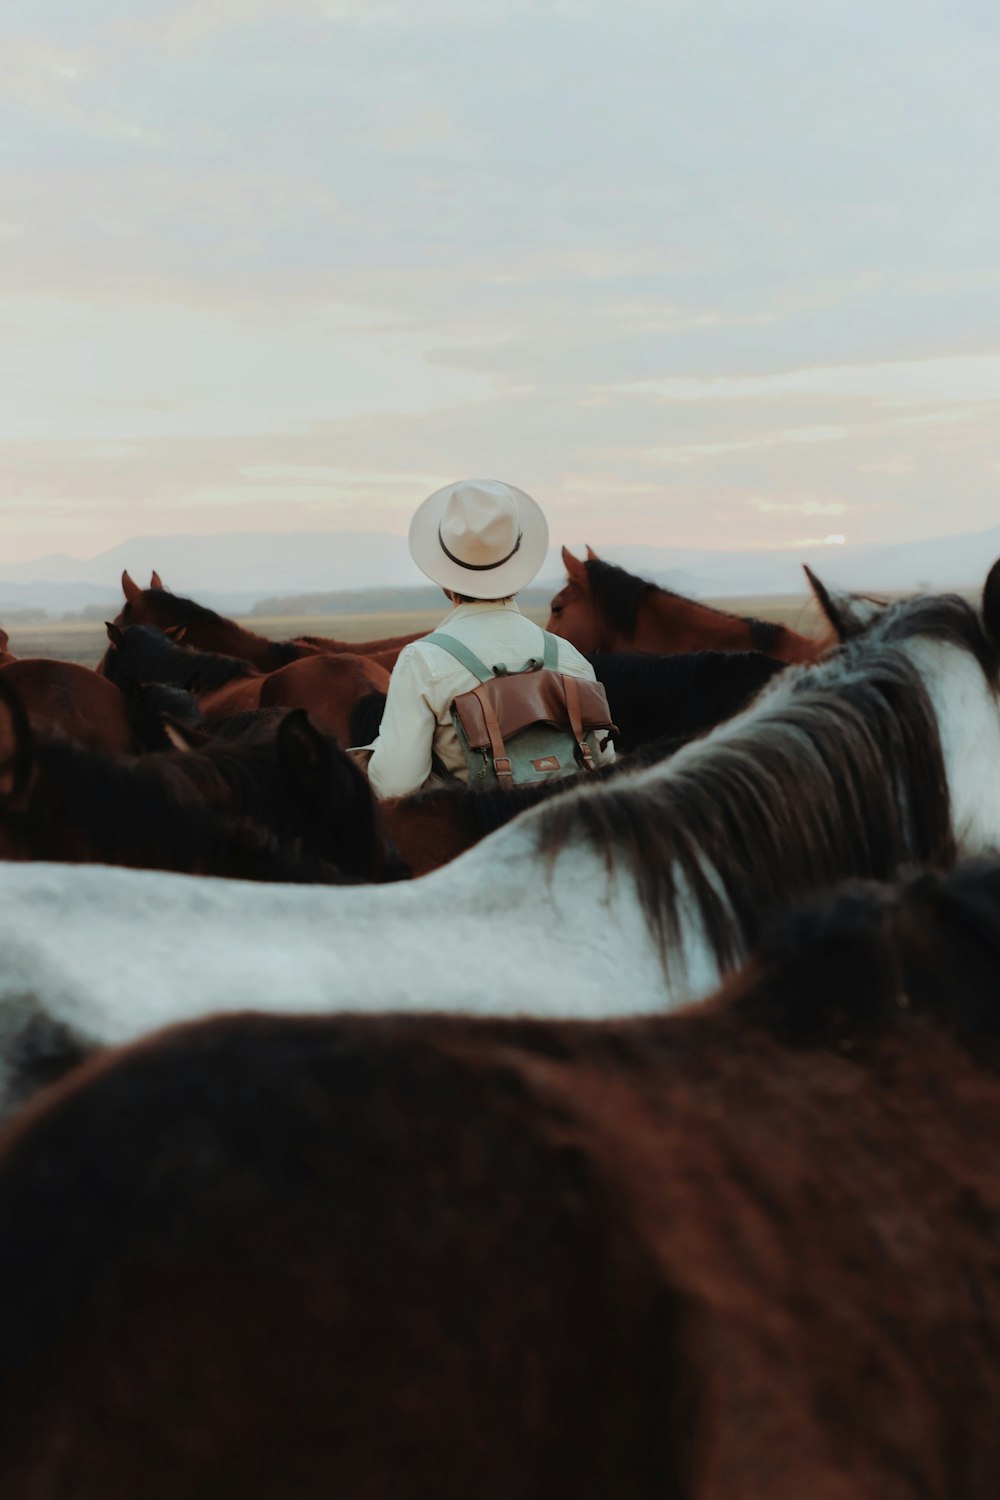 a man in a cowboy hat is surrounded by horses